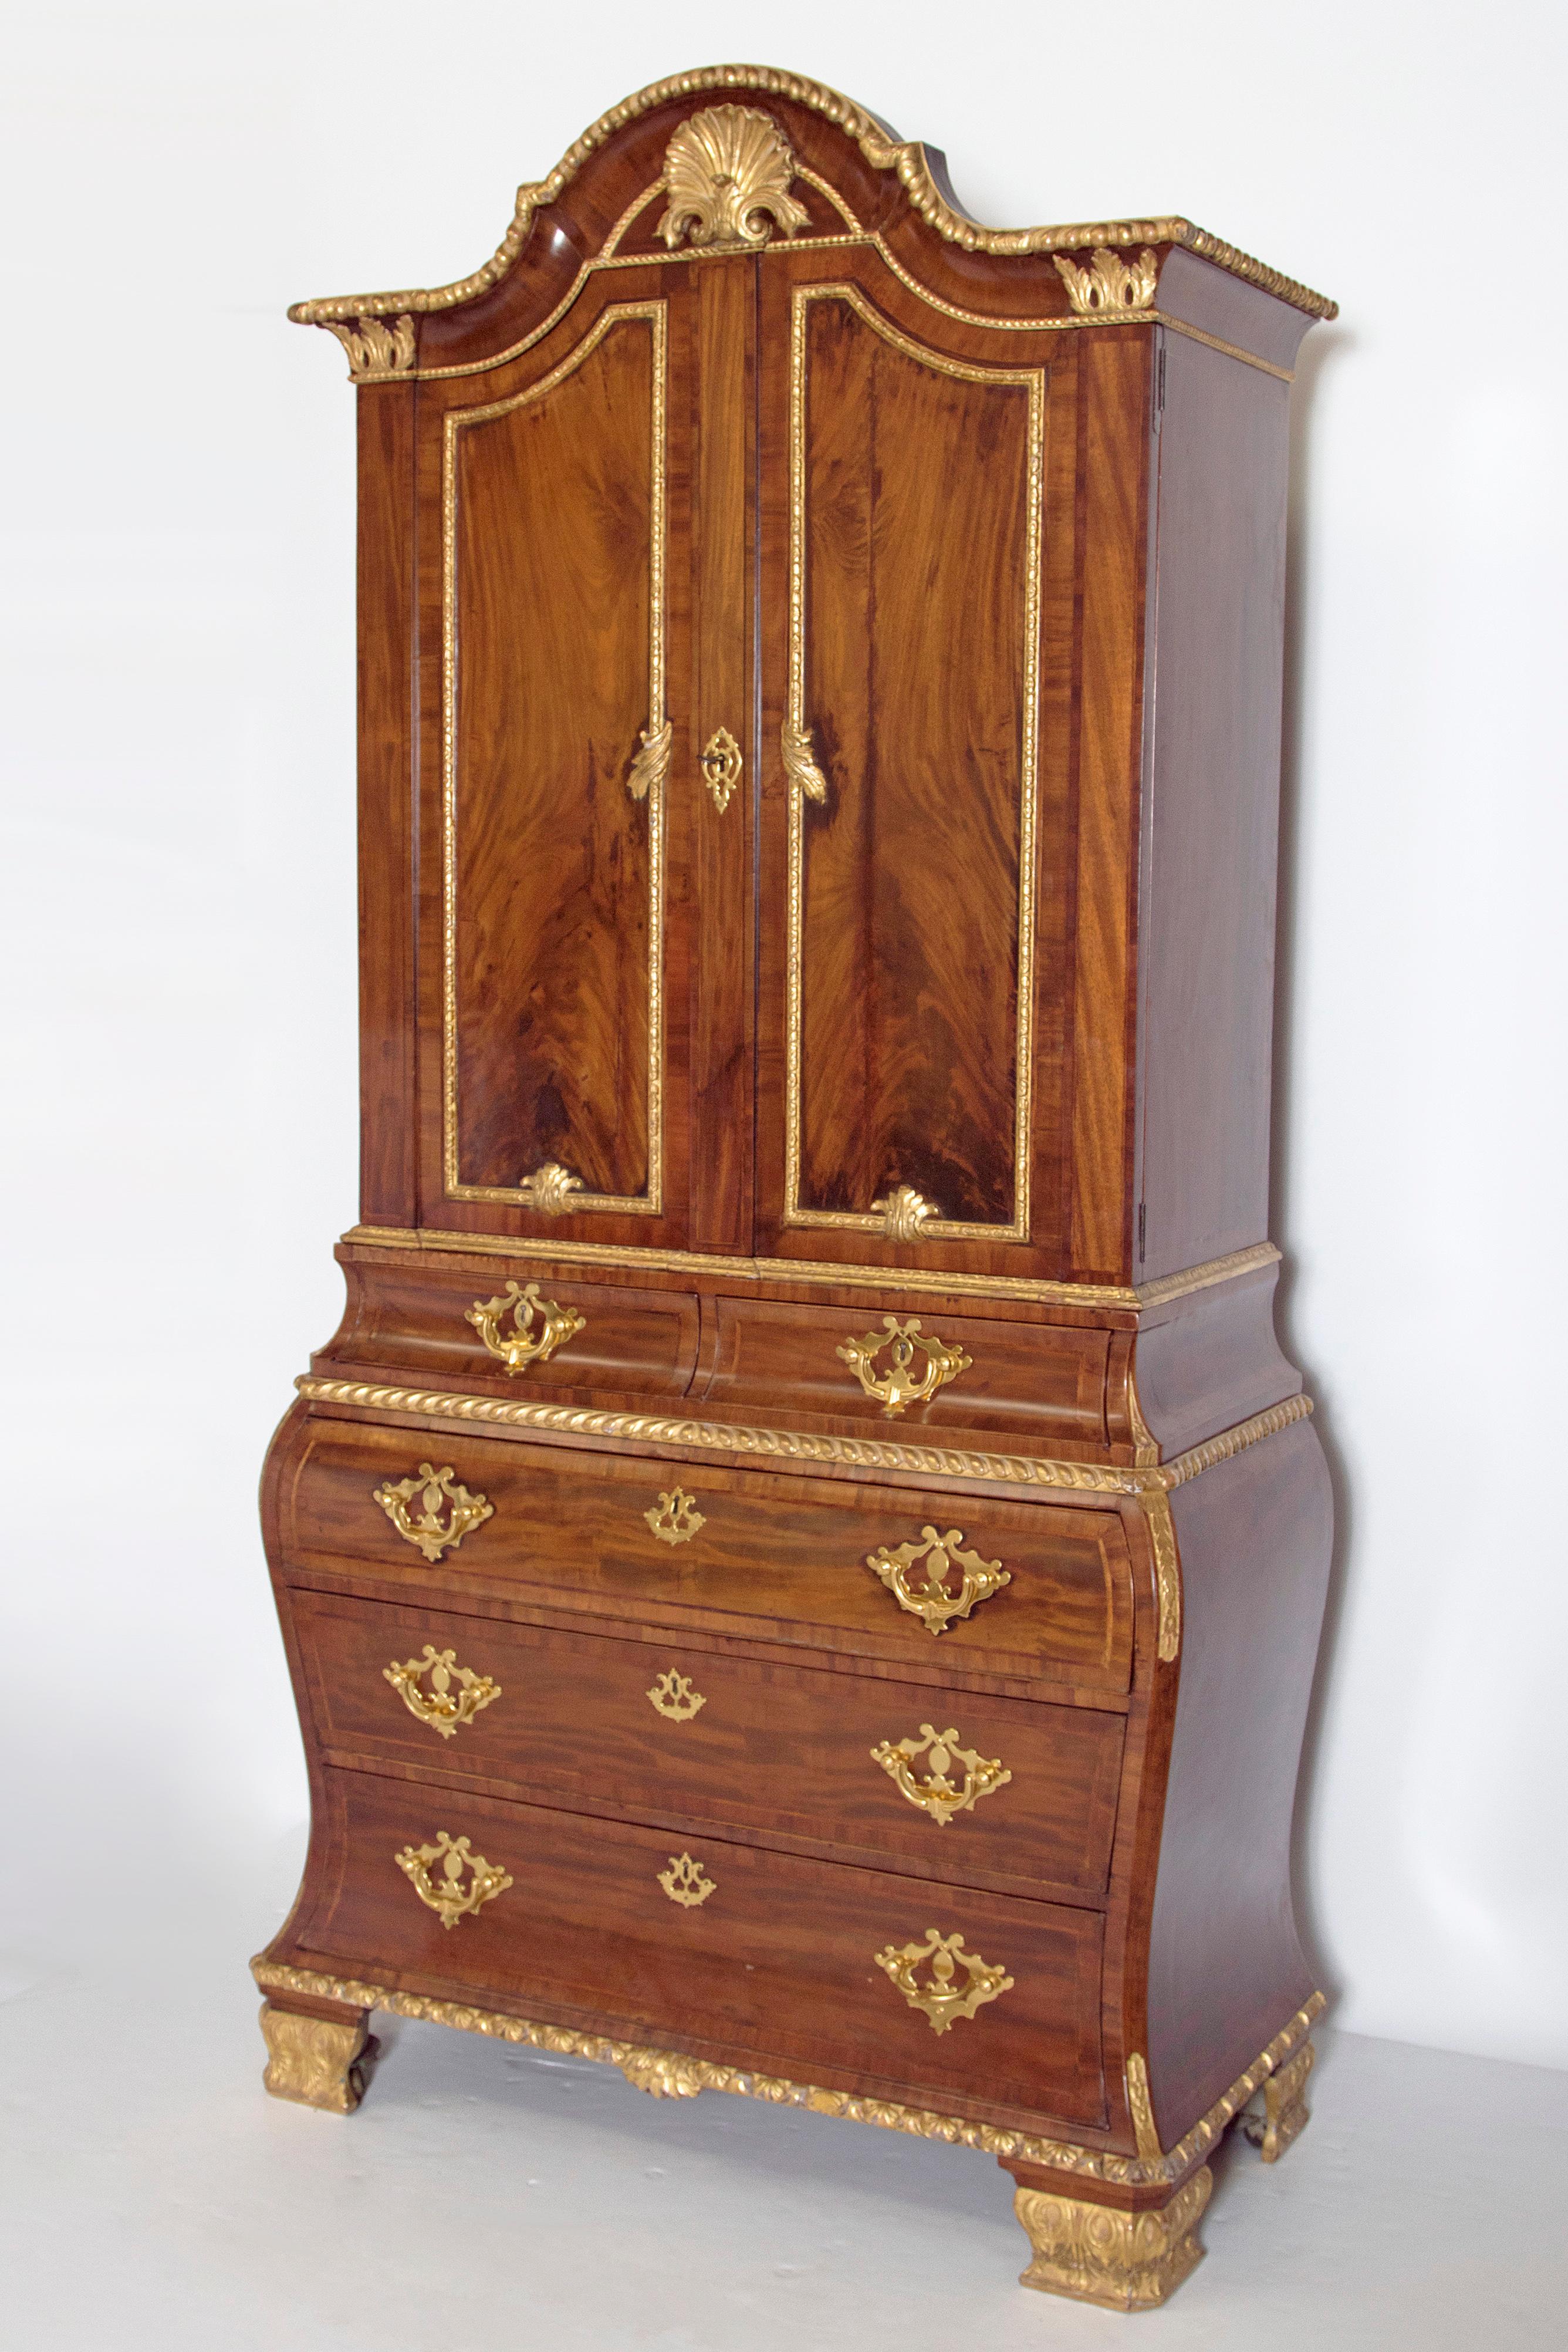 A very good quality early 20th century Continental mahogany and parcel-gilt rococo style secretary. In three parts, having a dome top cornice above two solid doors with key. Interior fitted with two adjustable shelves and siting on two small